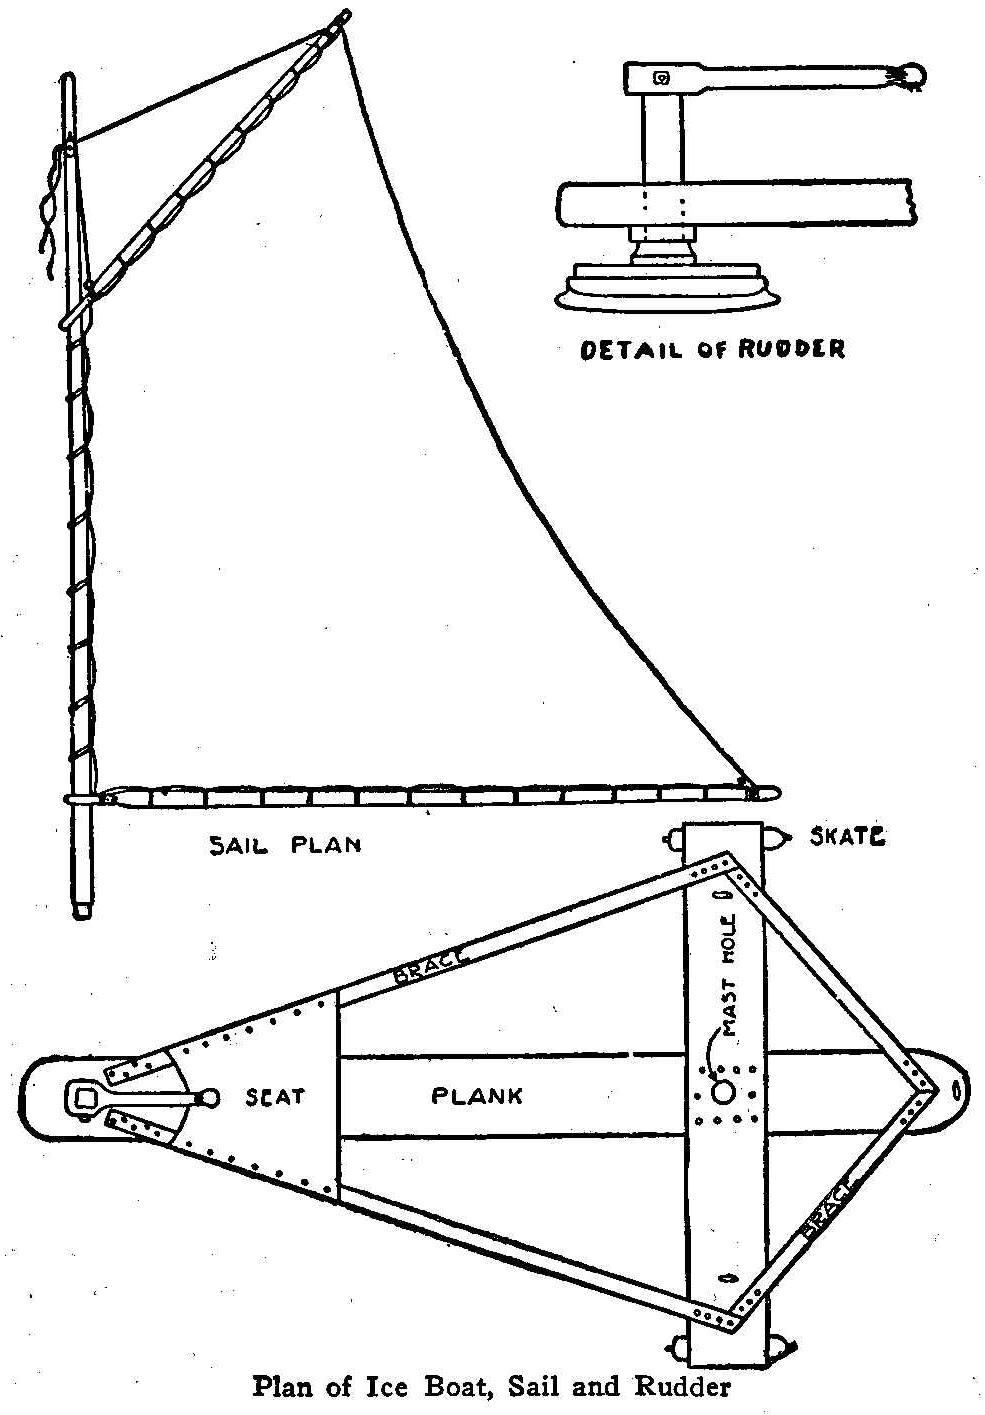 Plan of Ice Boat, Sail and Rudder